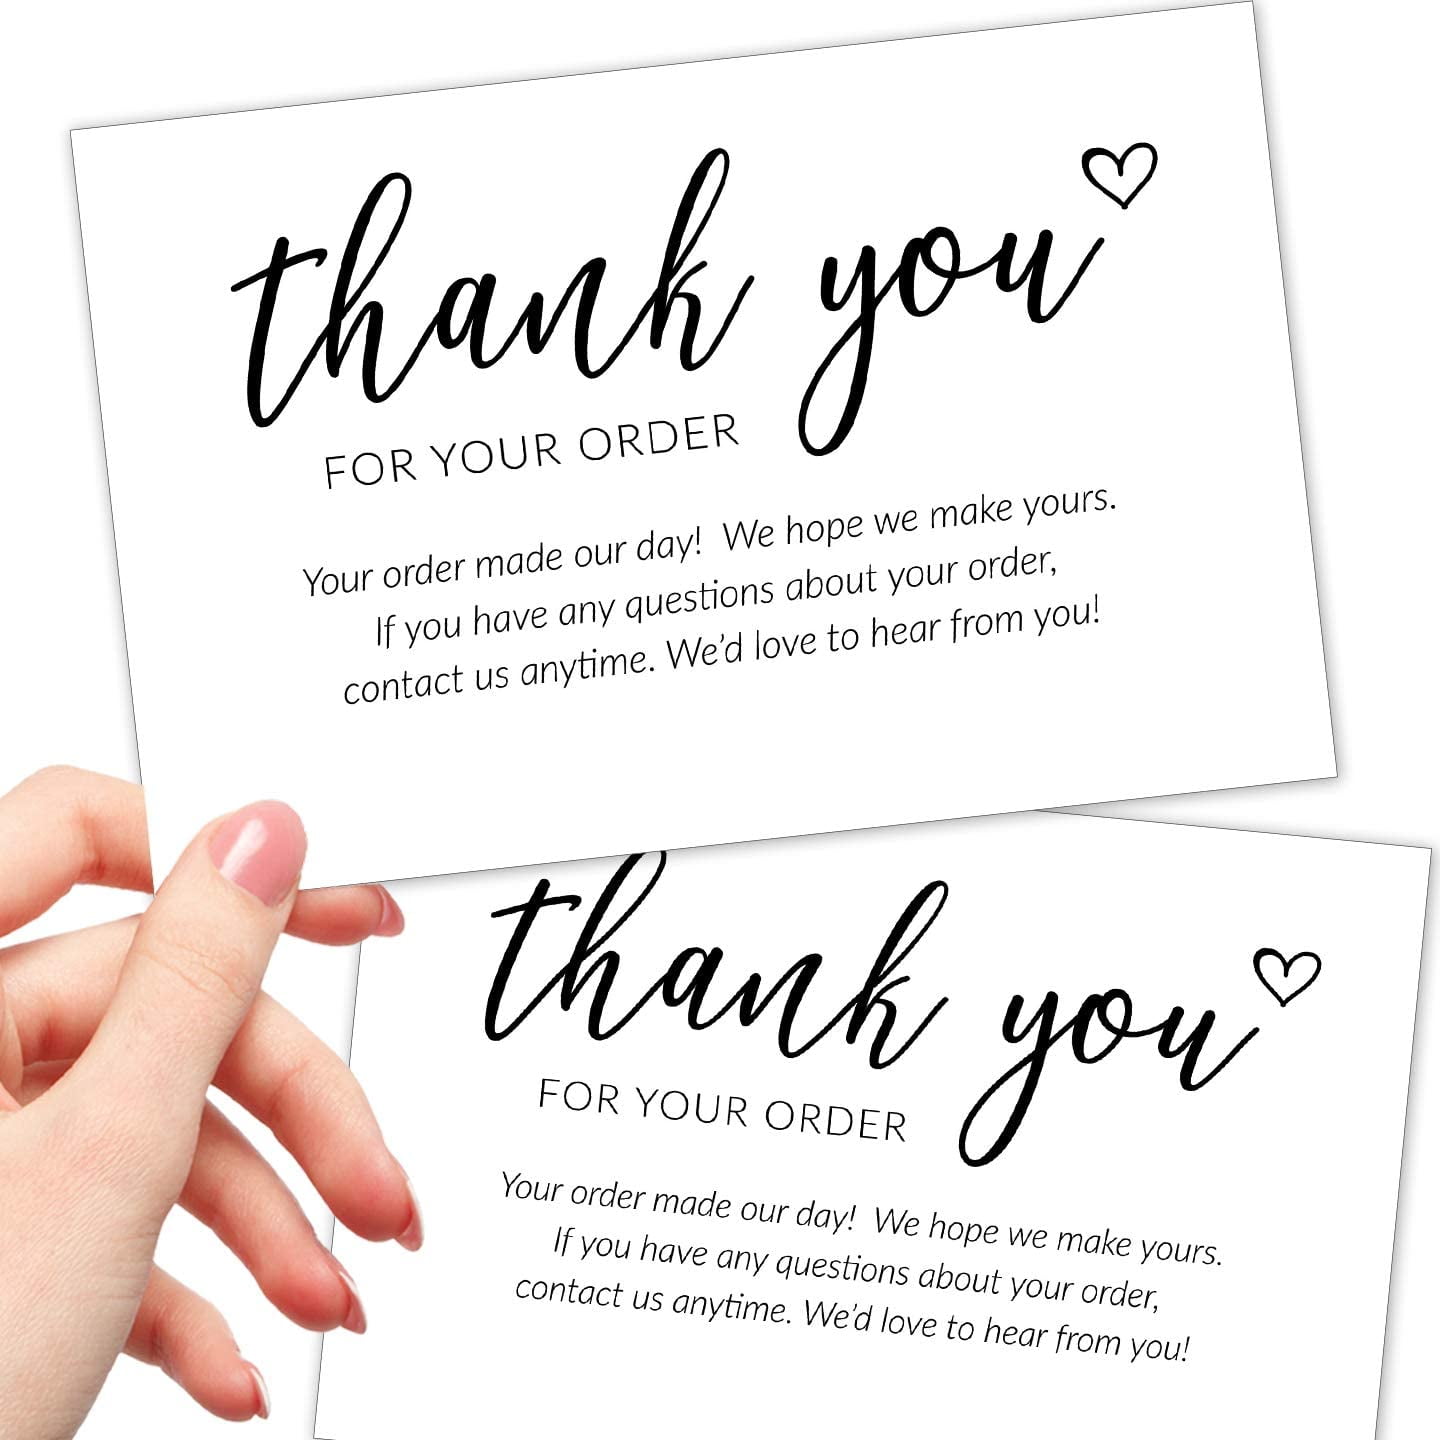 50 Extra Large Thank You For Your Order Cards - 4x6" Bulk Package Inserts for any Small Business